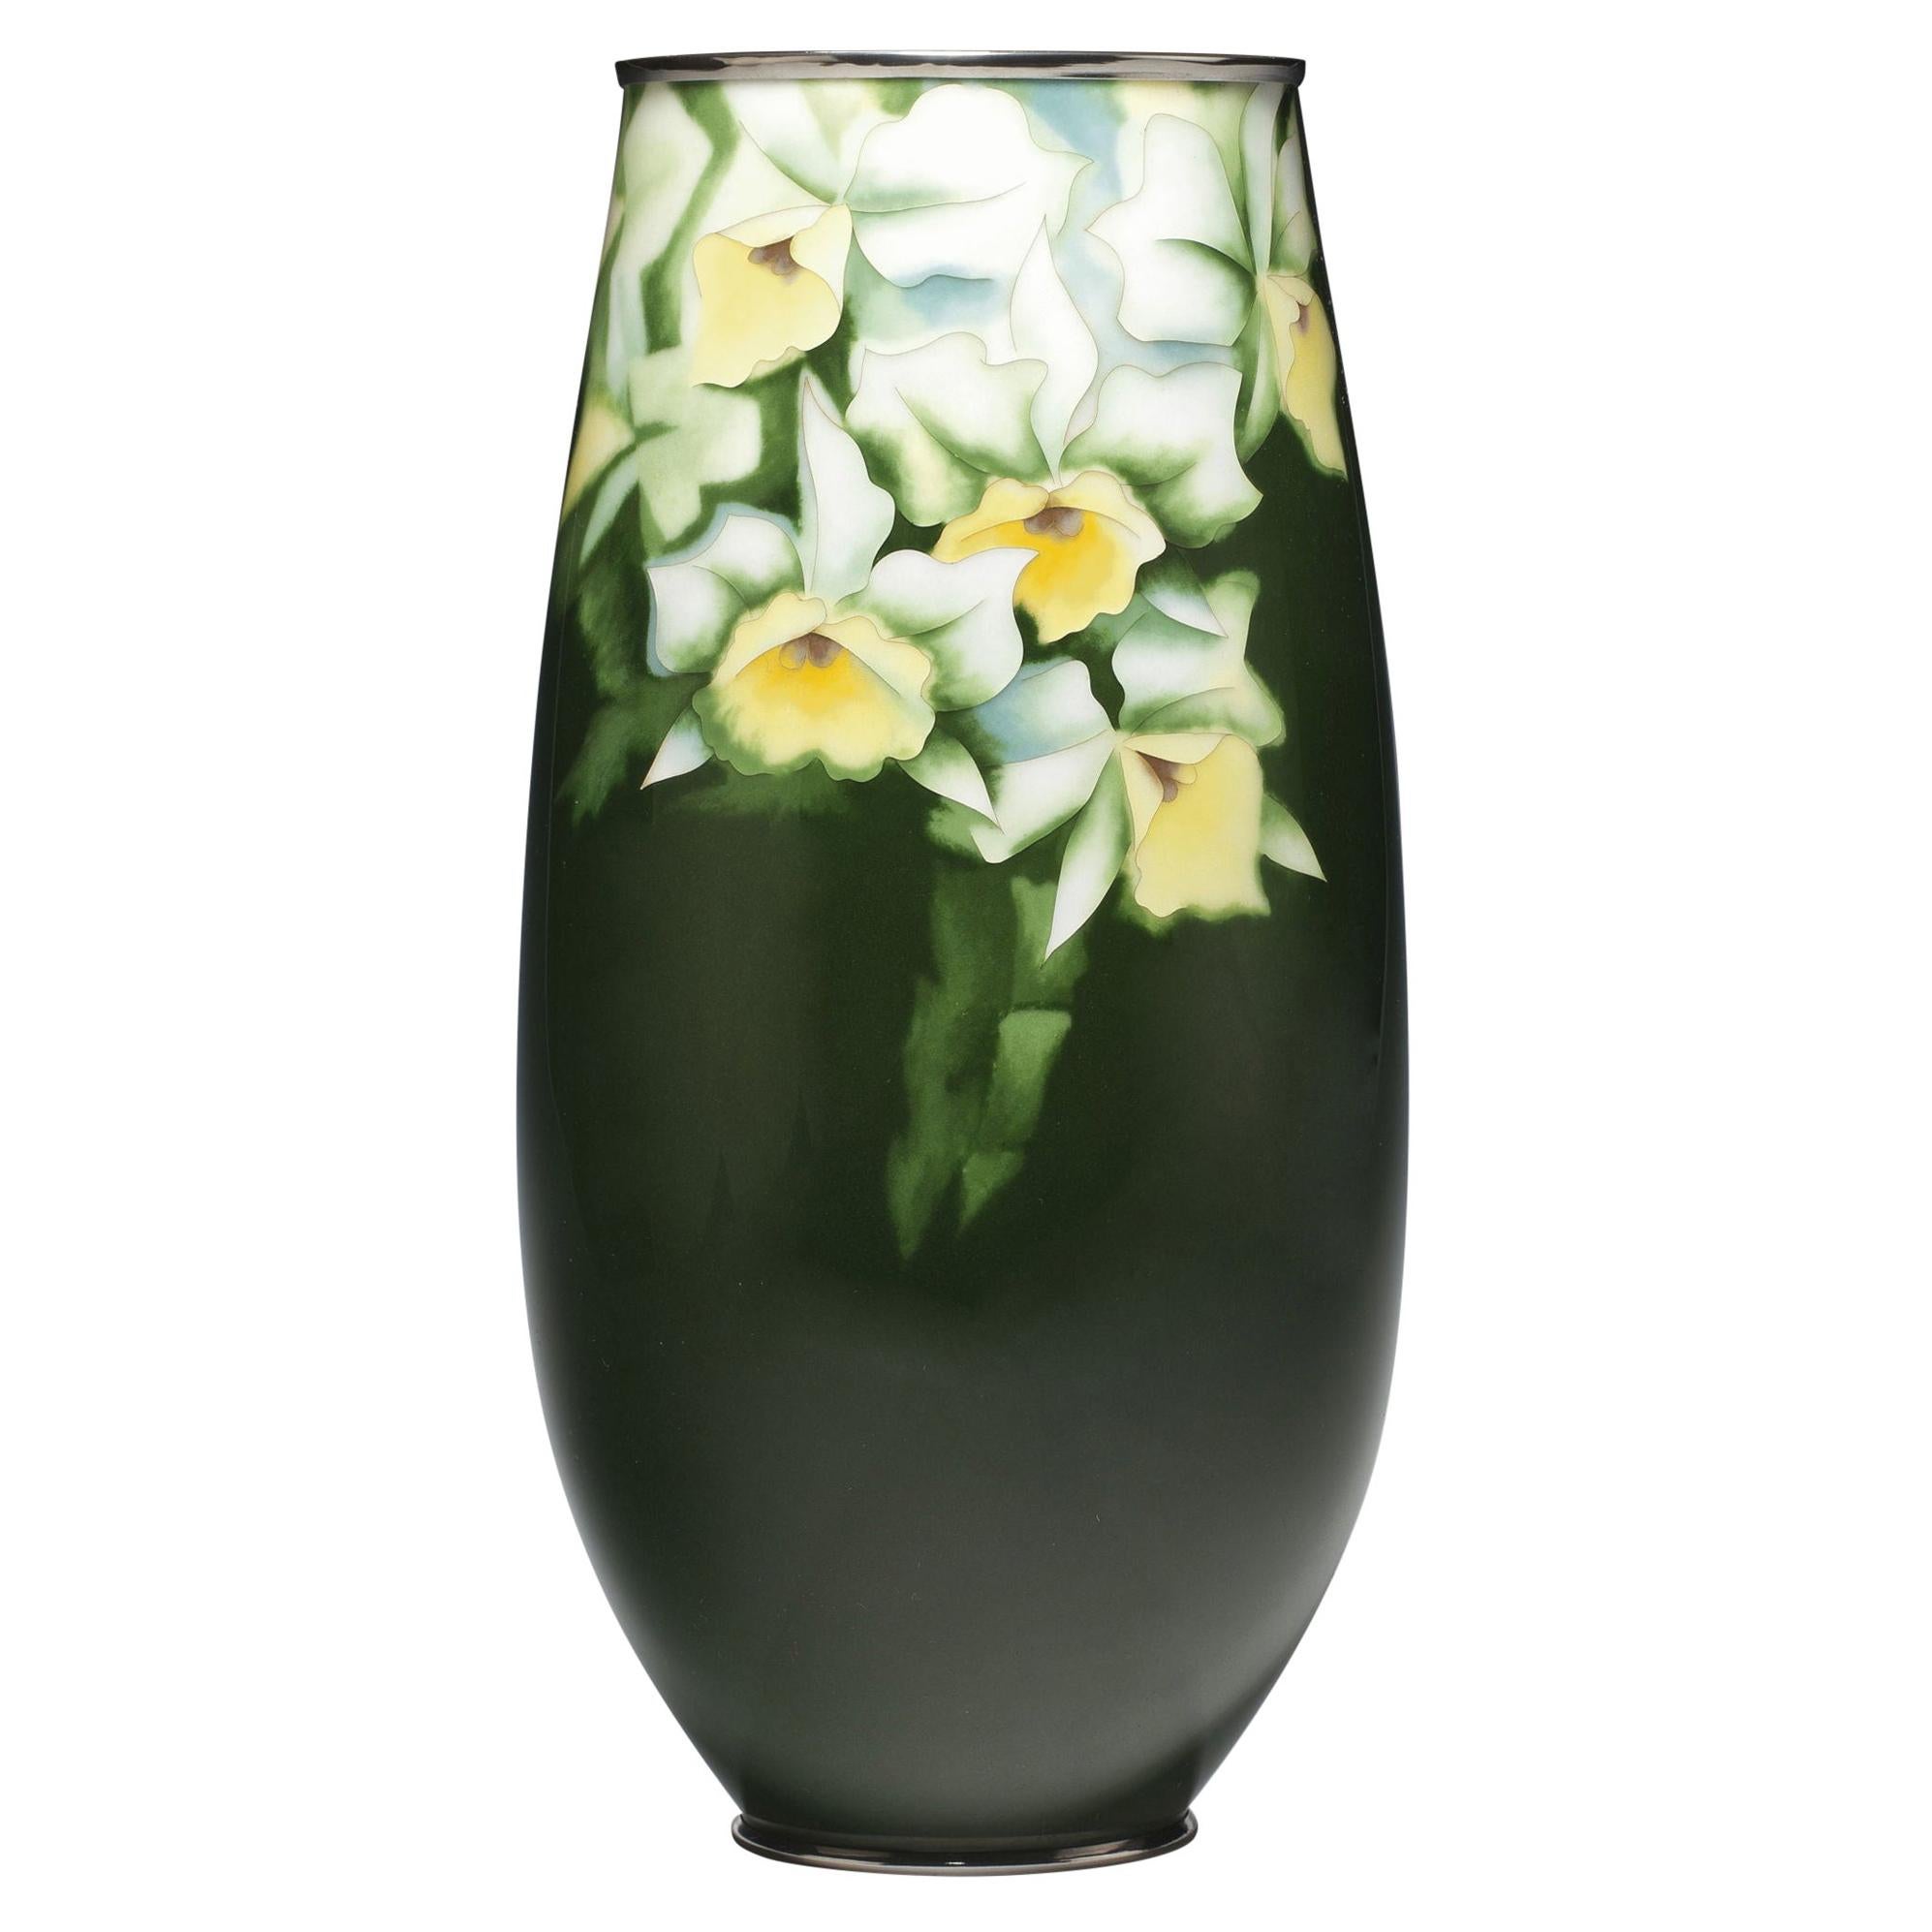 Japanese Cloisonné Vase by Ando, Mid Showa Period